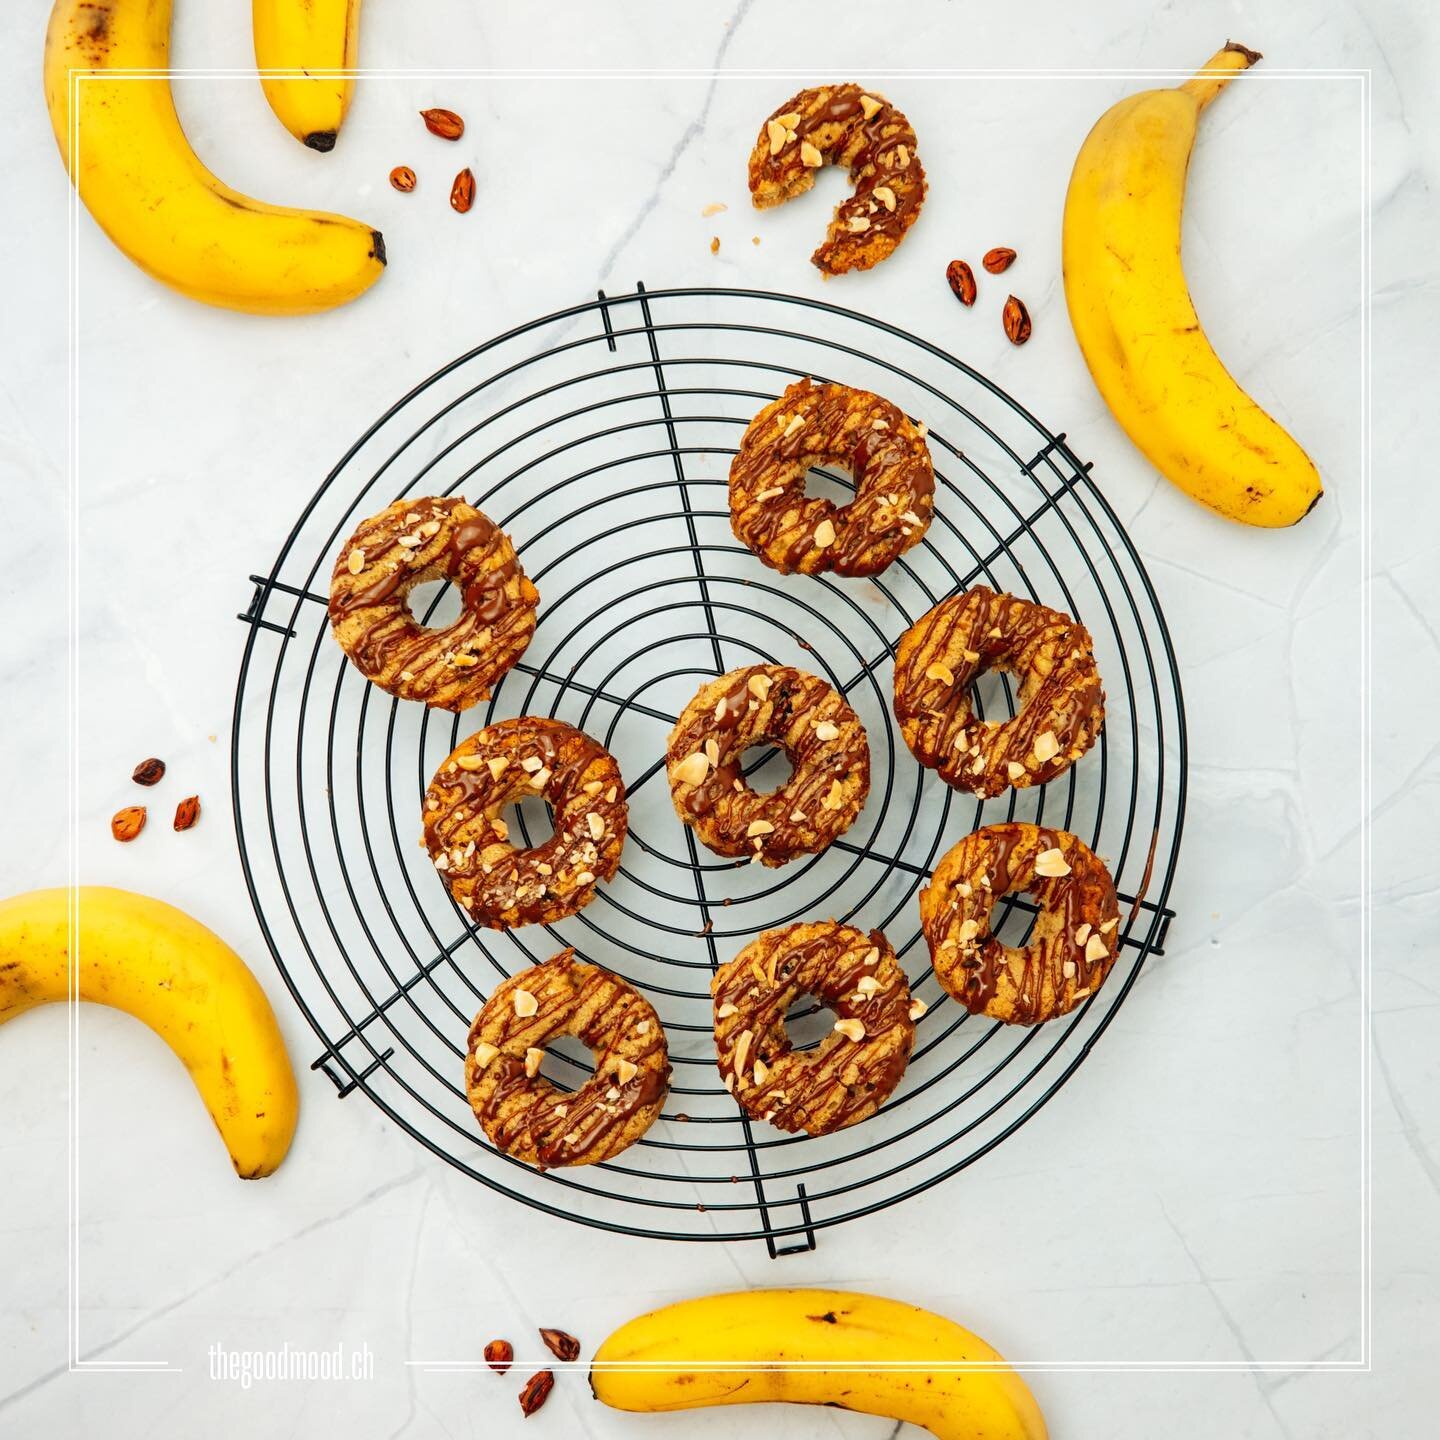 ♡ 
Chunky Monkey Banana Donuts 🍩 

These Banana Donuts 🍌🍩 are chewy, flavorful, and packed with healthy ingredients making them perfect for breakfast on the go or a pre-workout snack💪

What you need for these sweeties:

Wet ingredients:
- 3 ripe 